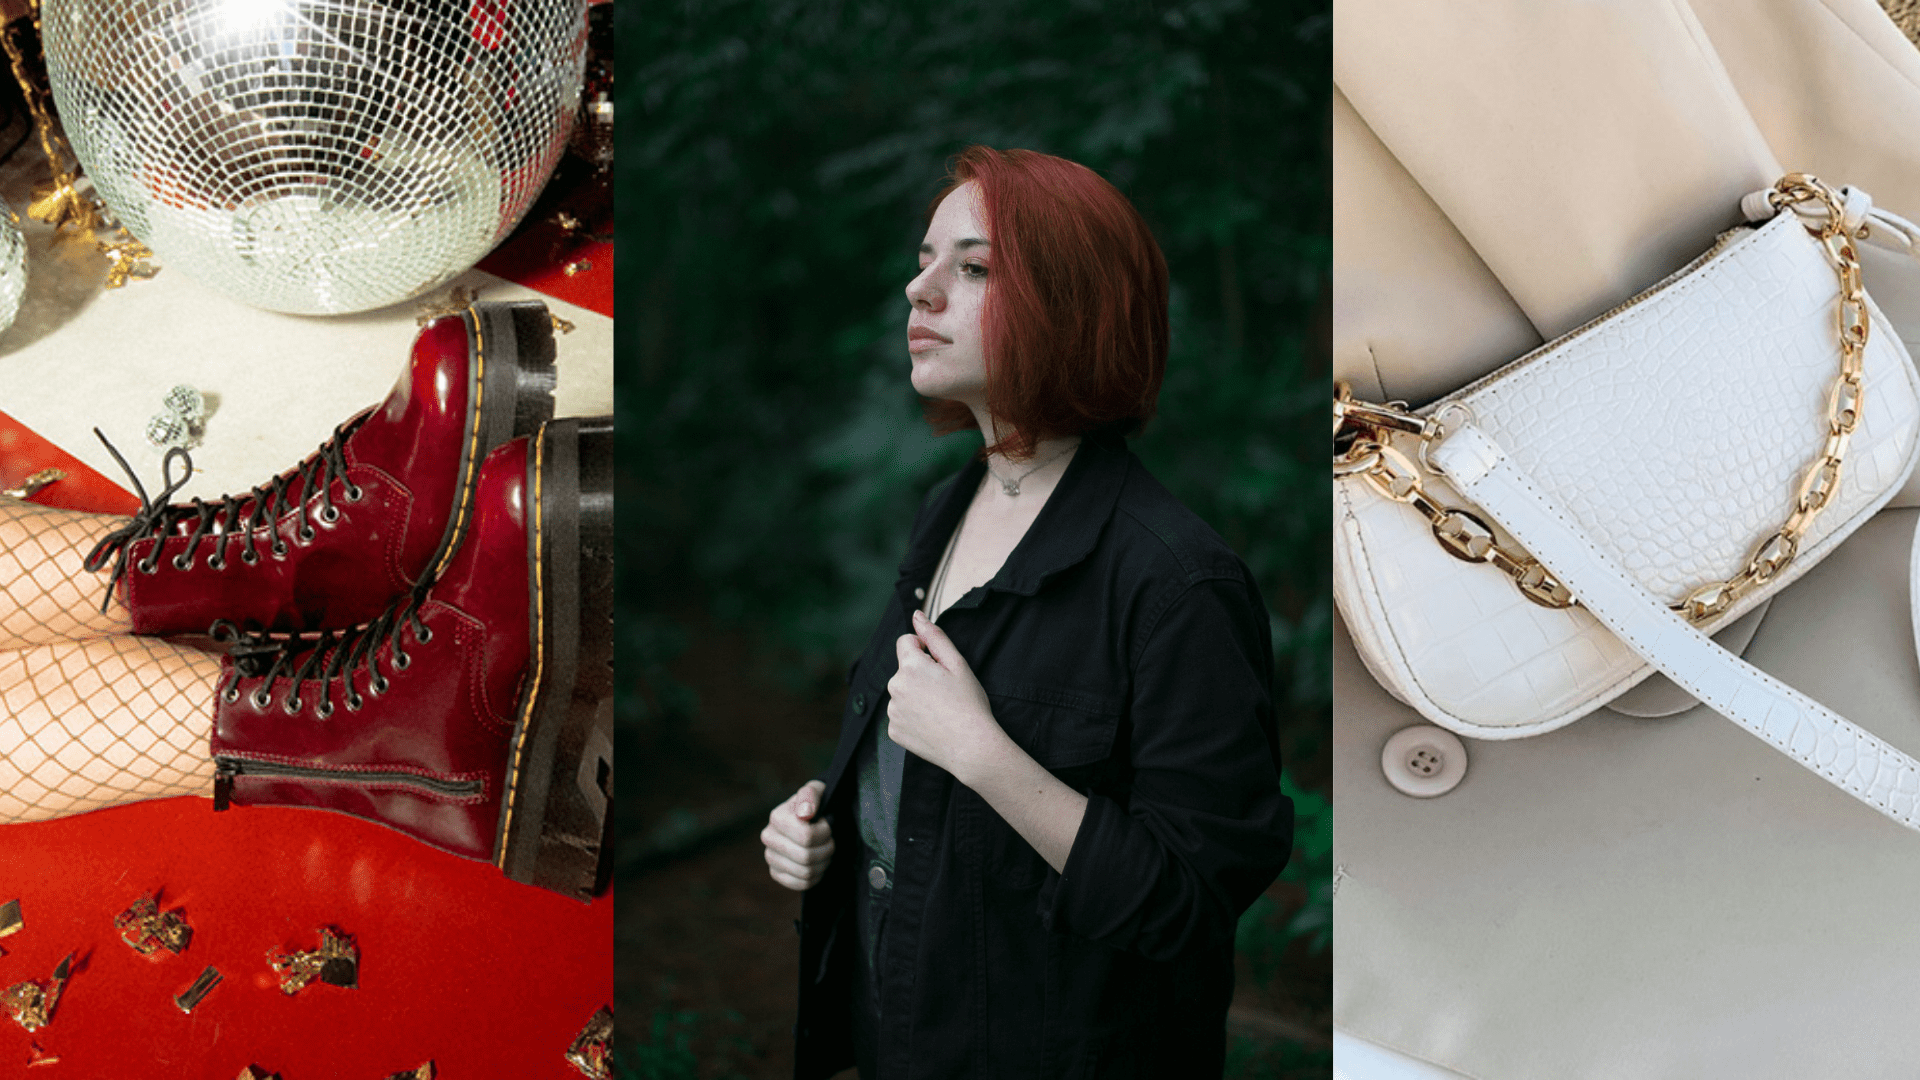 The Trendy Redhead Gift Guide: 7 Styles To Have On Your List